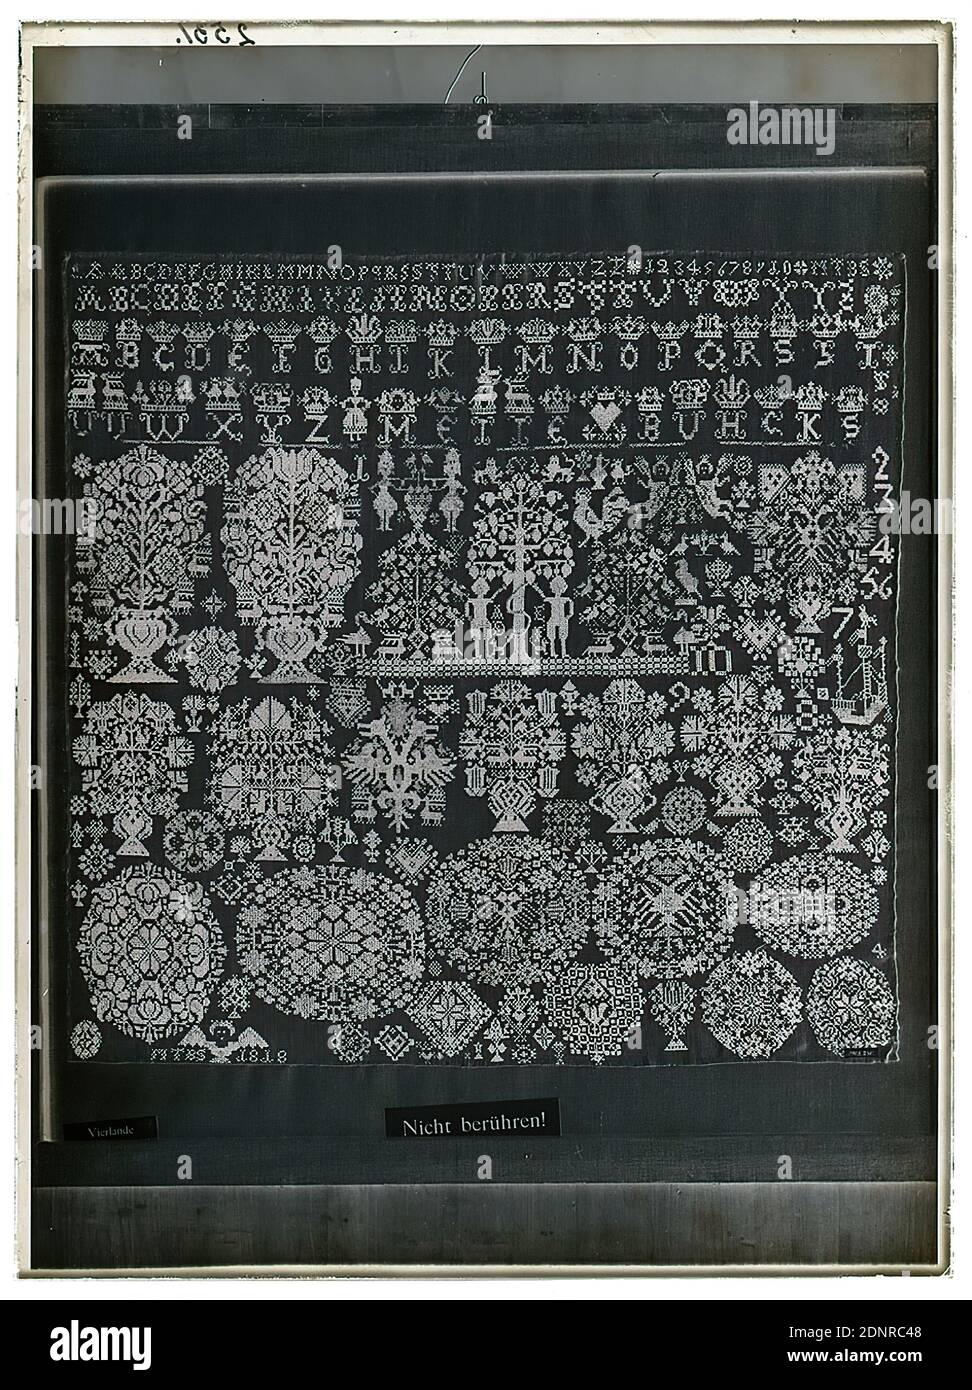 Wilhelm Weimar, name shawl from the Vierlanden, glass negative, black and white negative process, total: height: 23.8 cm; width: 17.8 cm, numbered: top left: in black ink: 2531. photography, applied art (textiles), ornaments, letters, alphabet, writing, number, flower ornaments, birds, Adam and Eve in paradise, eagle (birds), deer, grape, poultry (rooster, hen, chicken etc.) ducks, animals as ornaments, handicrafts, needlework, handicrafts, arts and crafts, industrial design Stock Photo